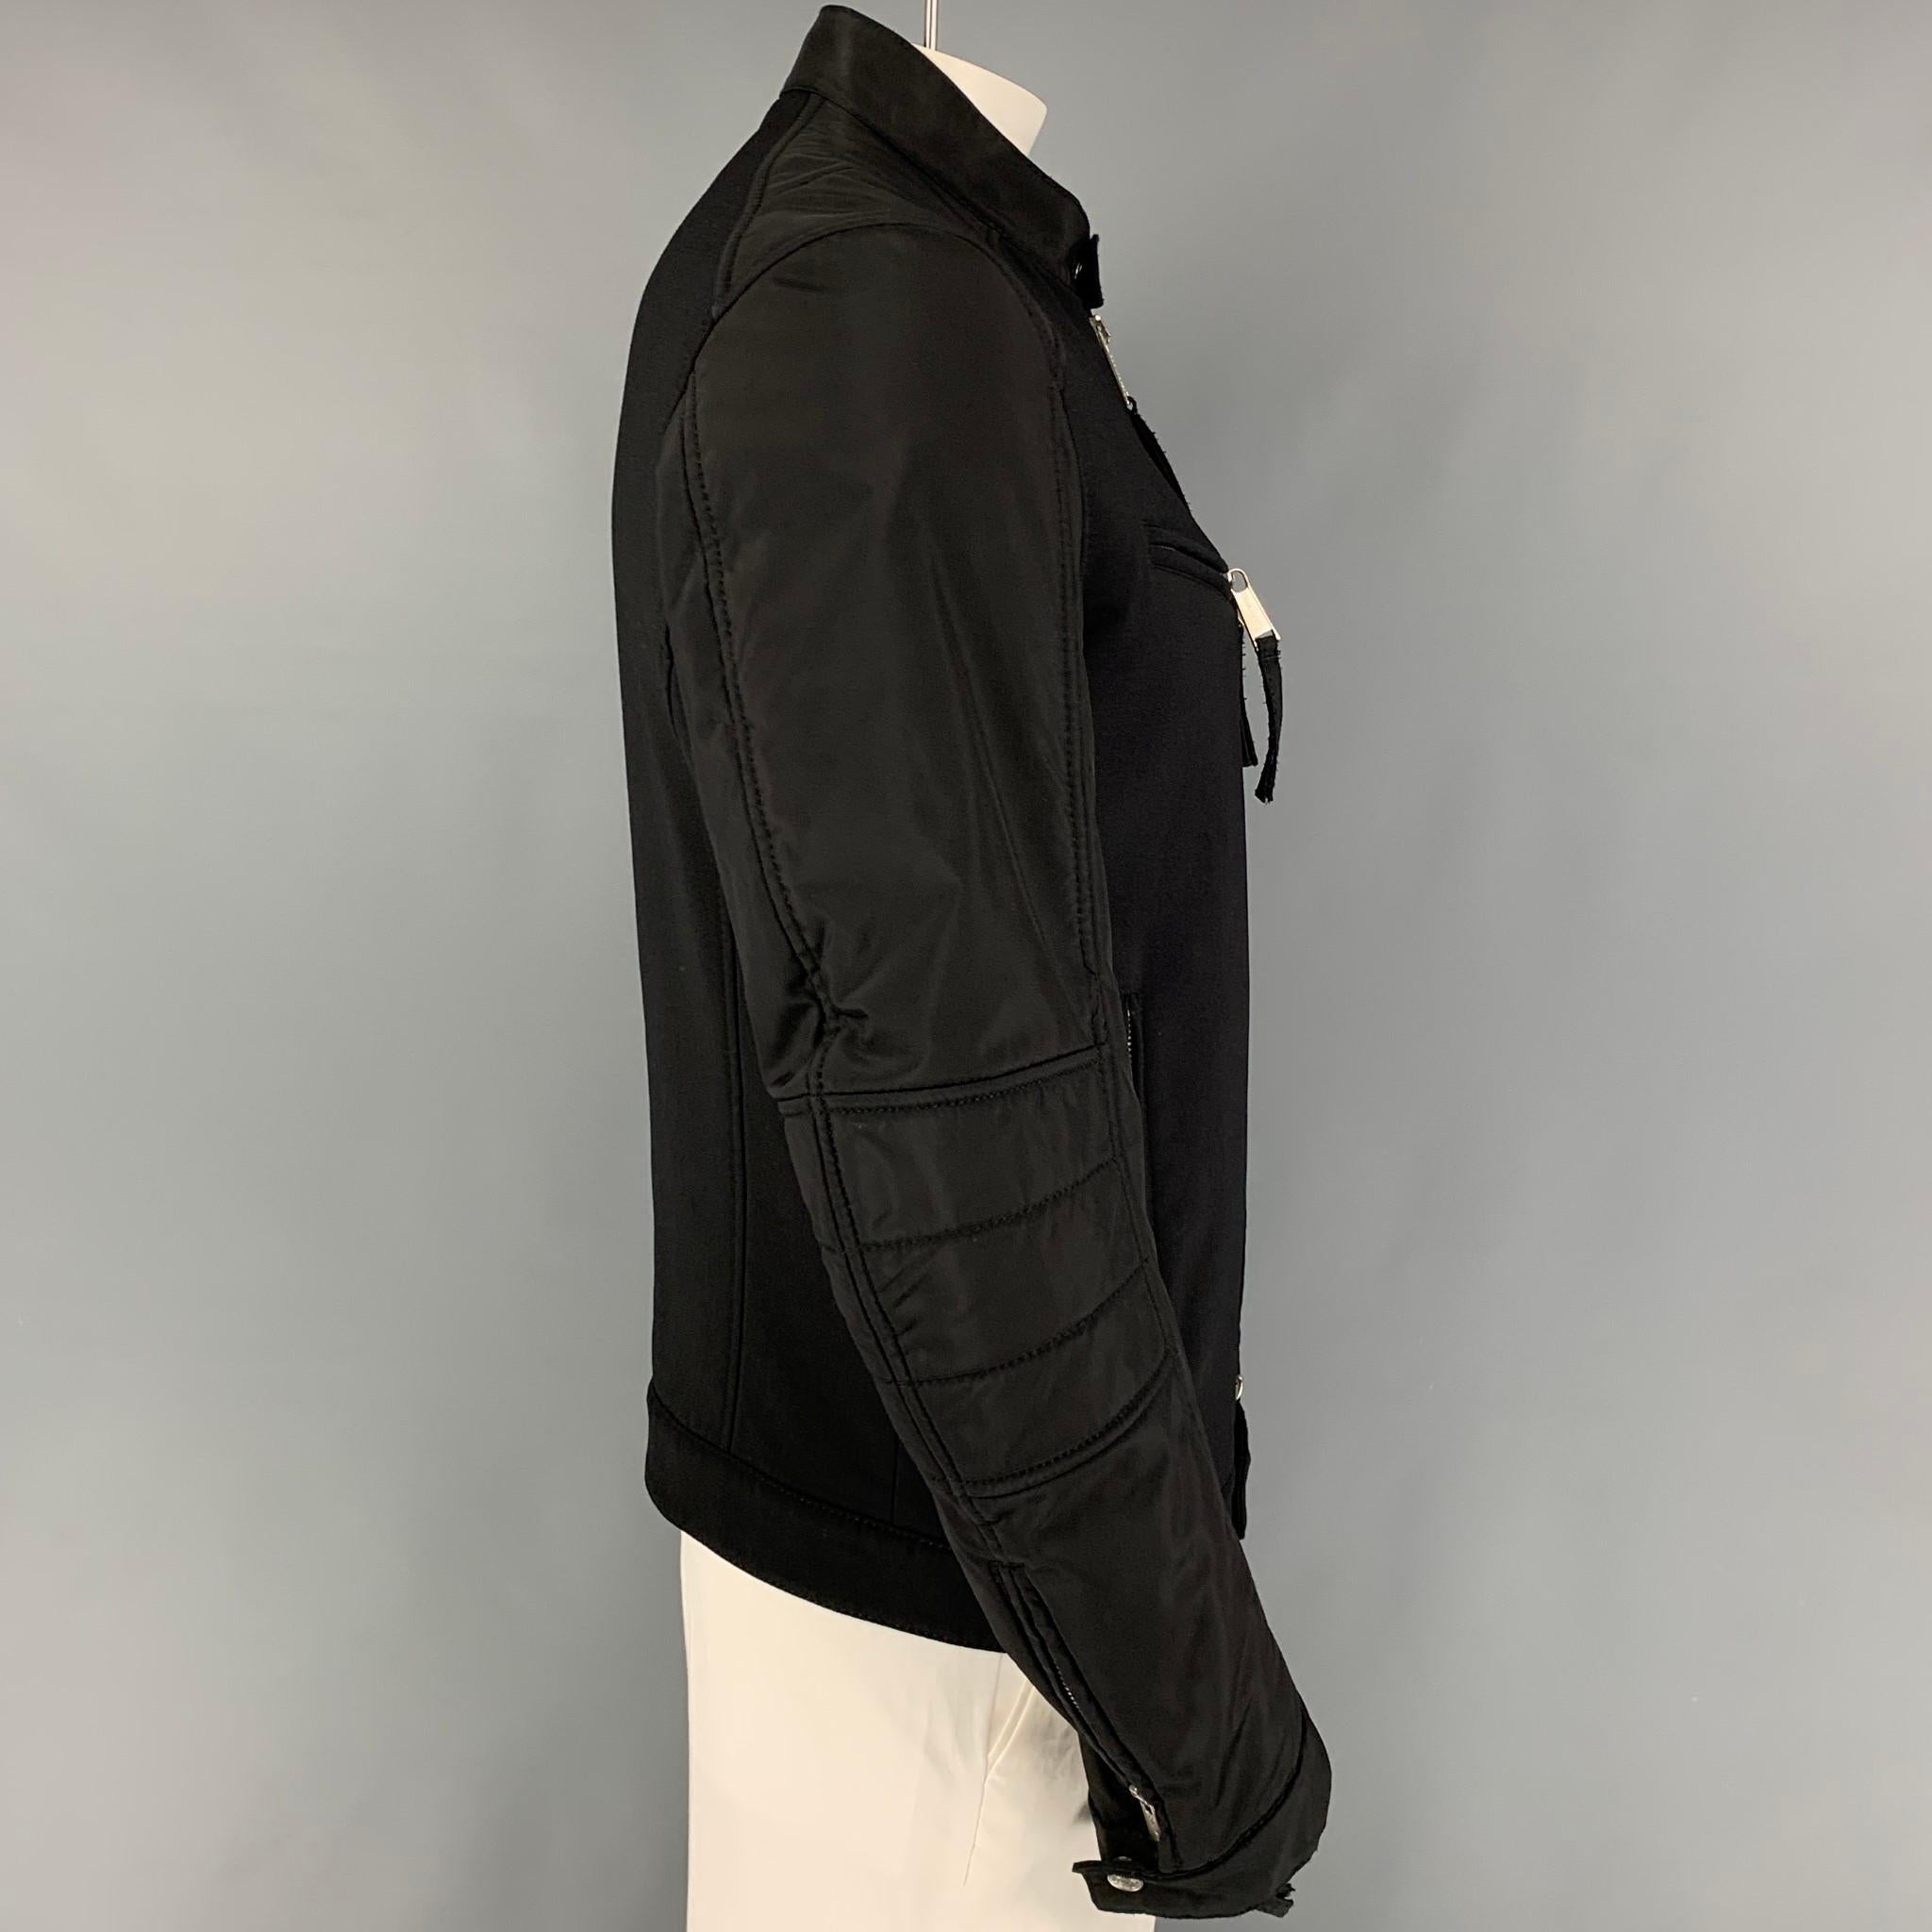 DSQUARED2 jacket comes in a black wool blend featuring a biker style, collarless, zipped sleeves, padded elbows, zipper pockets, and a full zip up closure. Made in Italy. 

Good Pre-Owned Condition. Moderate discoloration at interior.
Marked: